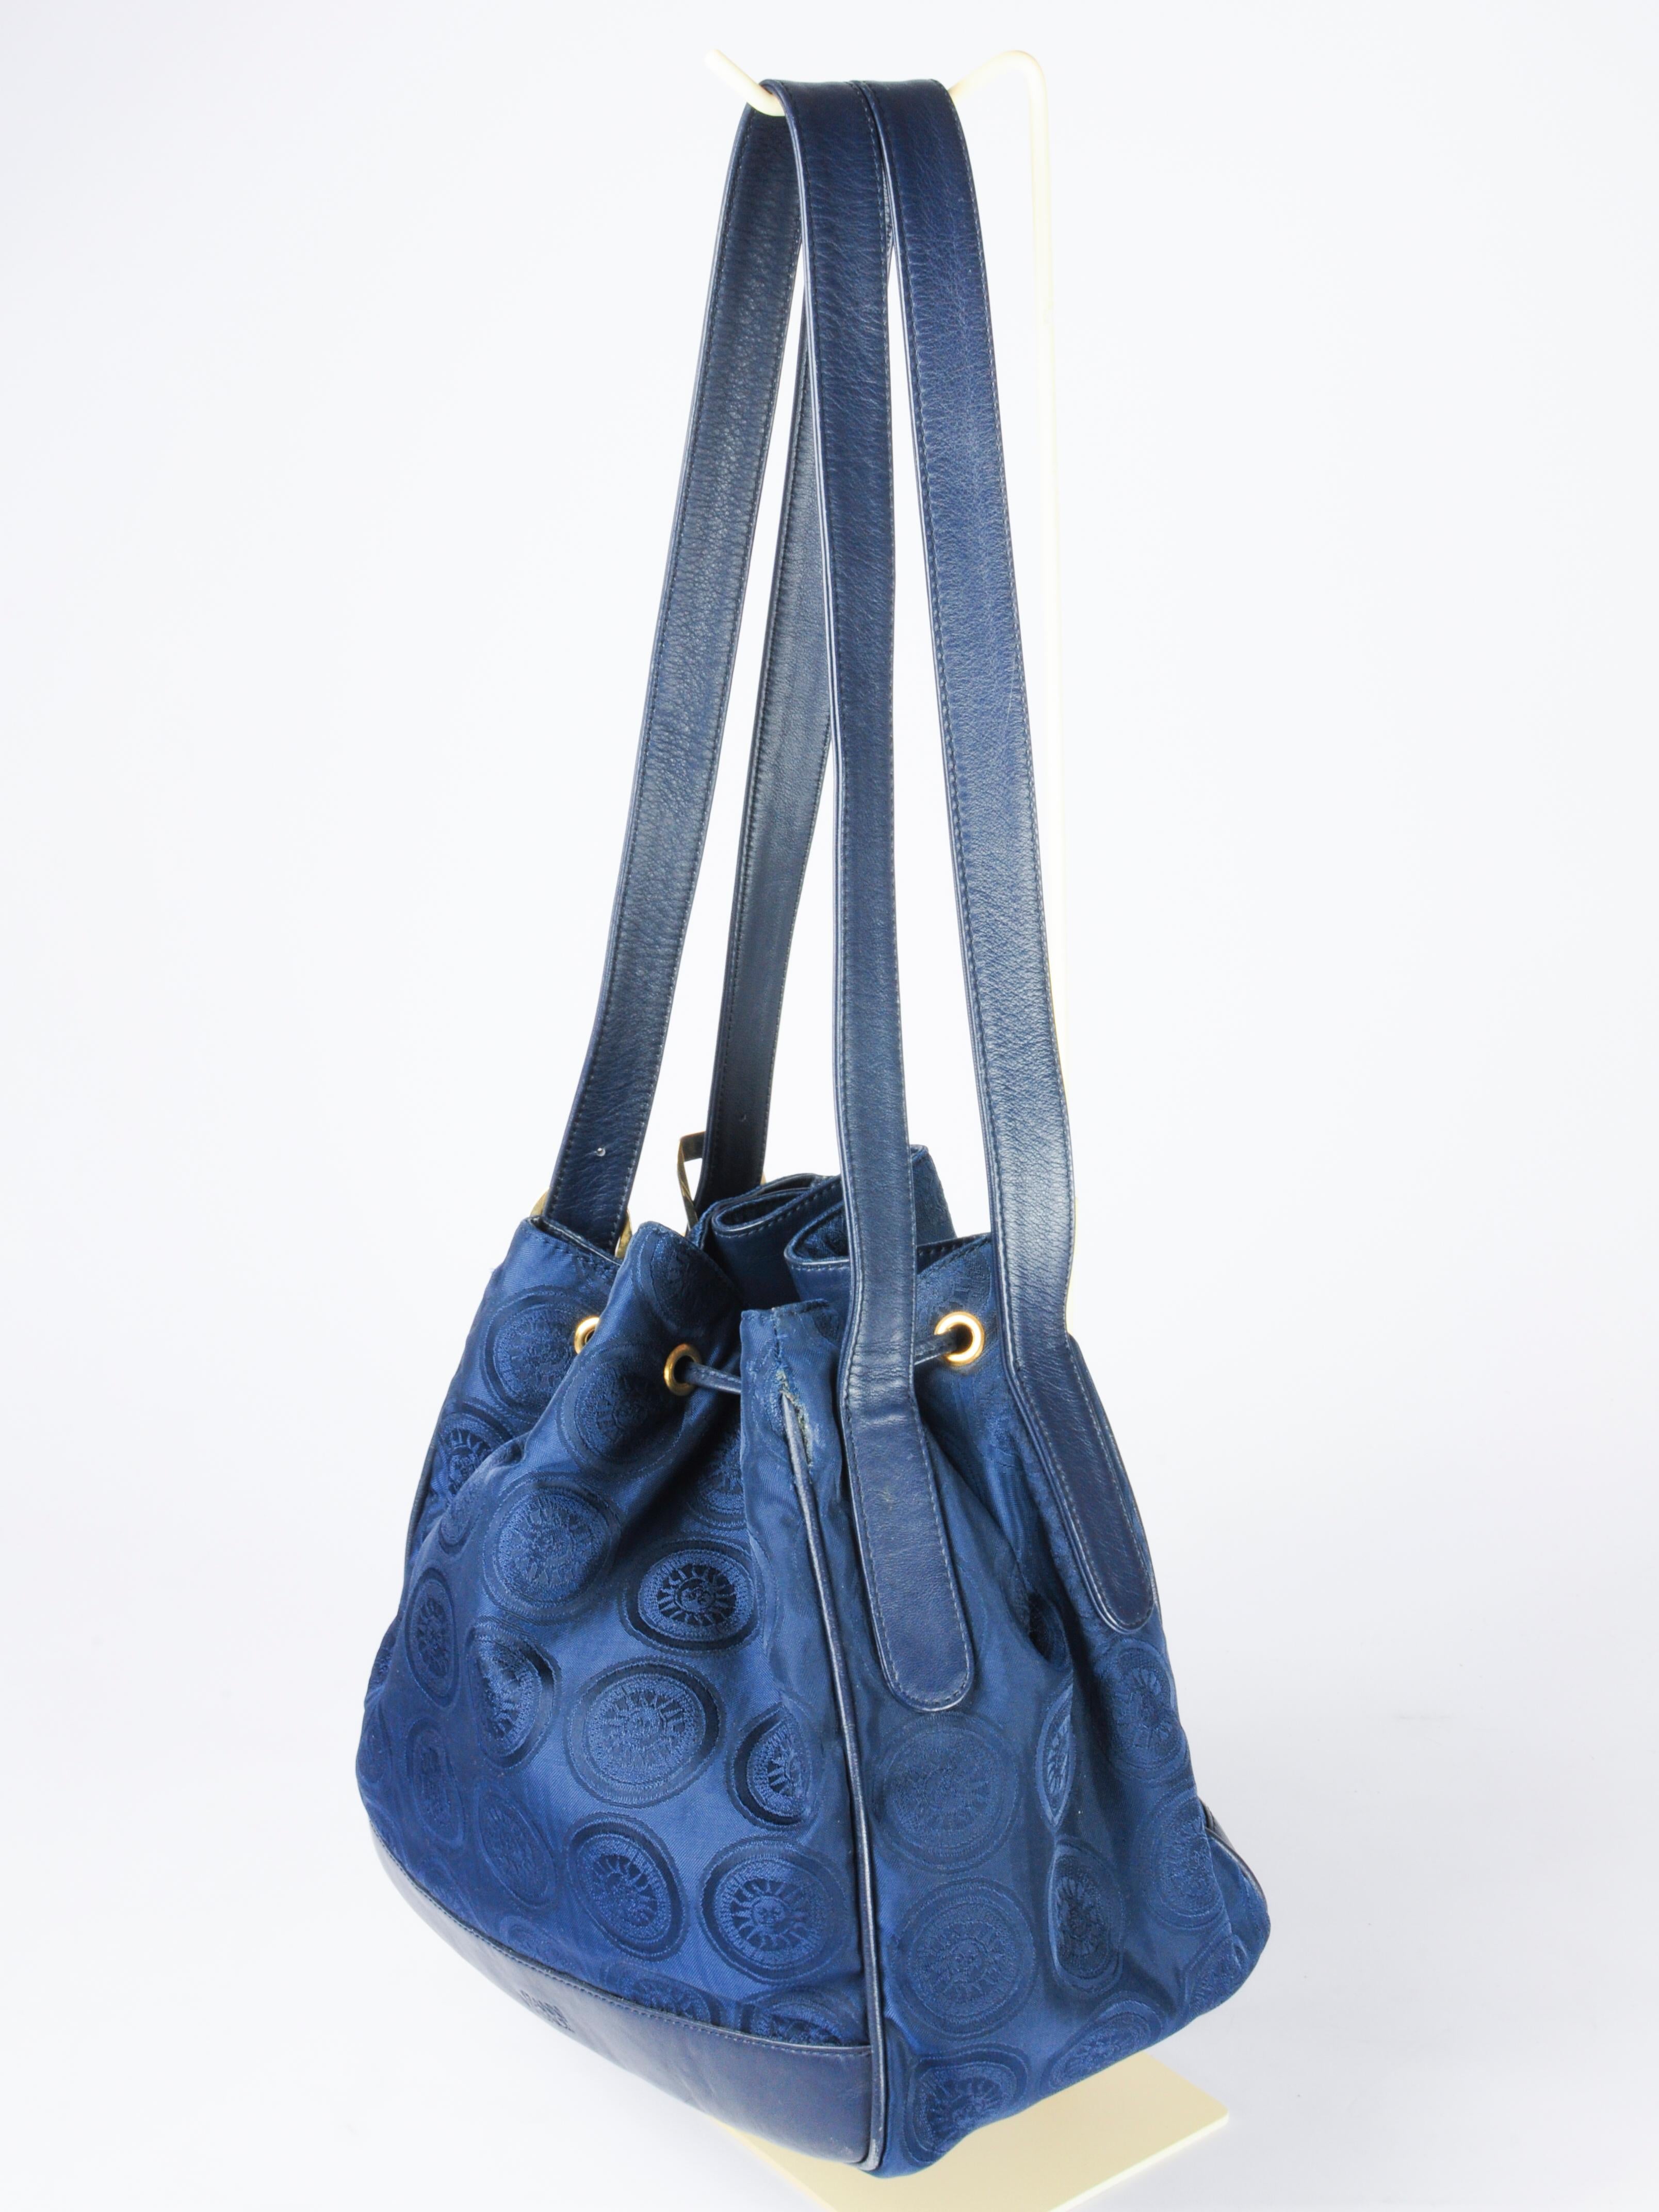  Gianni Versace Shoulder Bucket Bag with Sun Print Western Medusa Details 1990s In Fair Condition For Sale In AMSTERDAM, NL